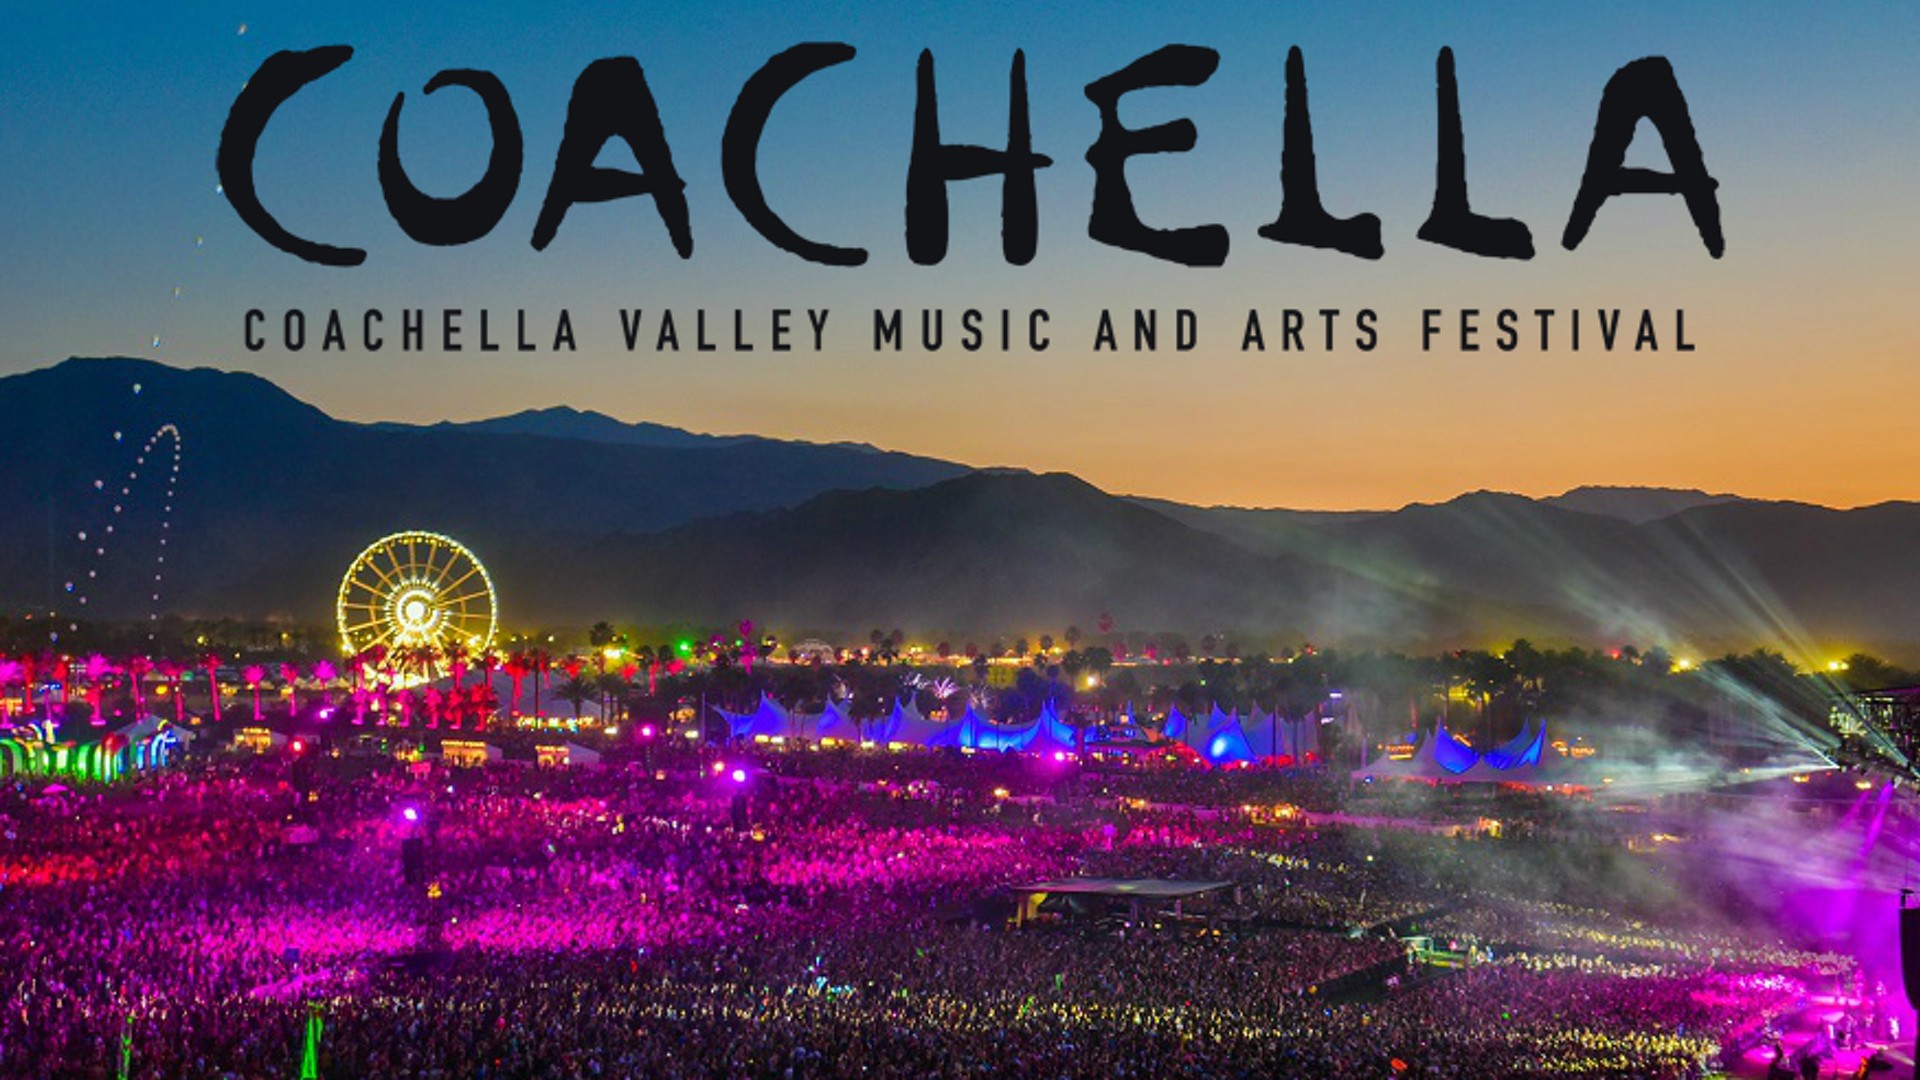 Coachella 2019 Background Wallpaper HD with high-resolution 1920x1080 pixel. You can use this wallpaper for your Desktop Computer Backgrounds, Mac Wallpapers, Android Lock screen or iPhone Screensavers and another smartphone device